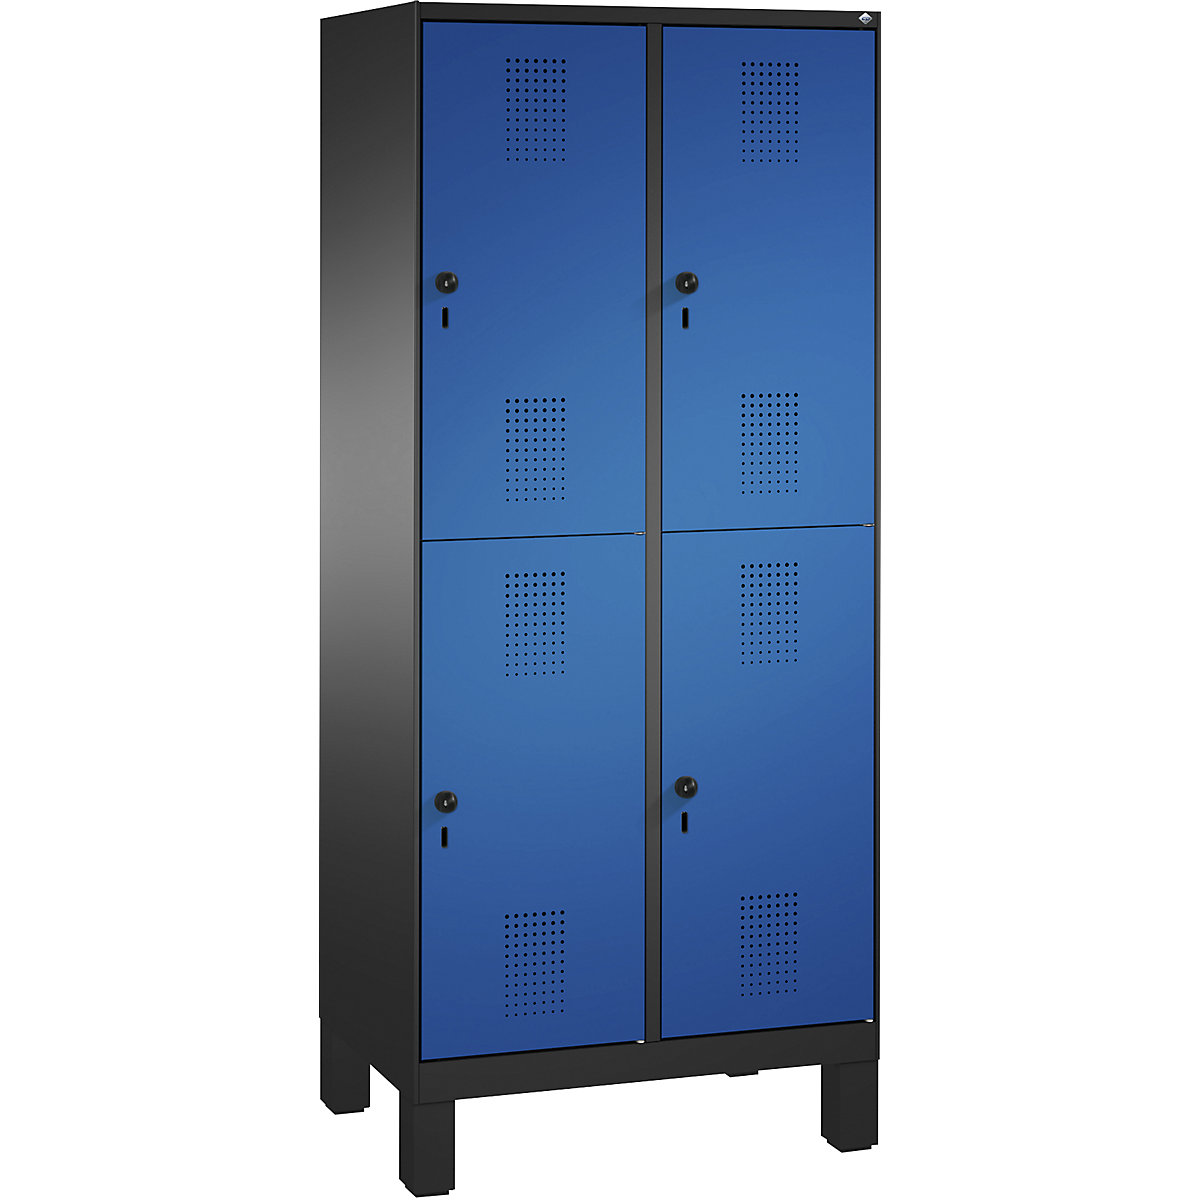 EVOLO cloakroom locker, double tier, with feet – C+P, 2 compartments, 2 shelf compartments each, compartment width 400 mm, black grey / gentian blue-13